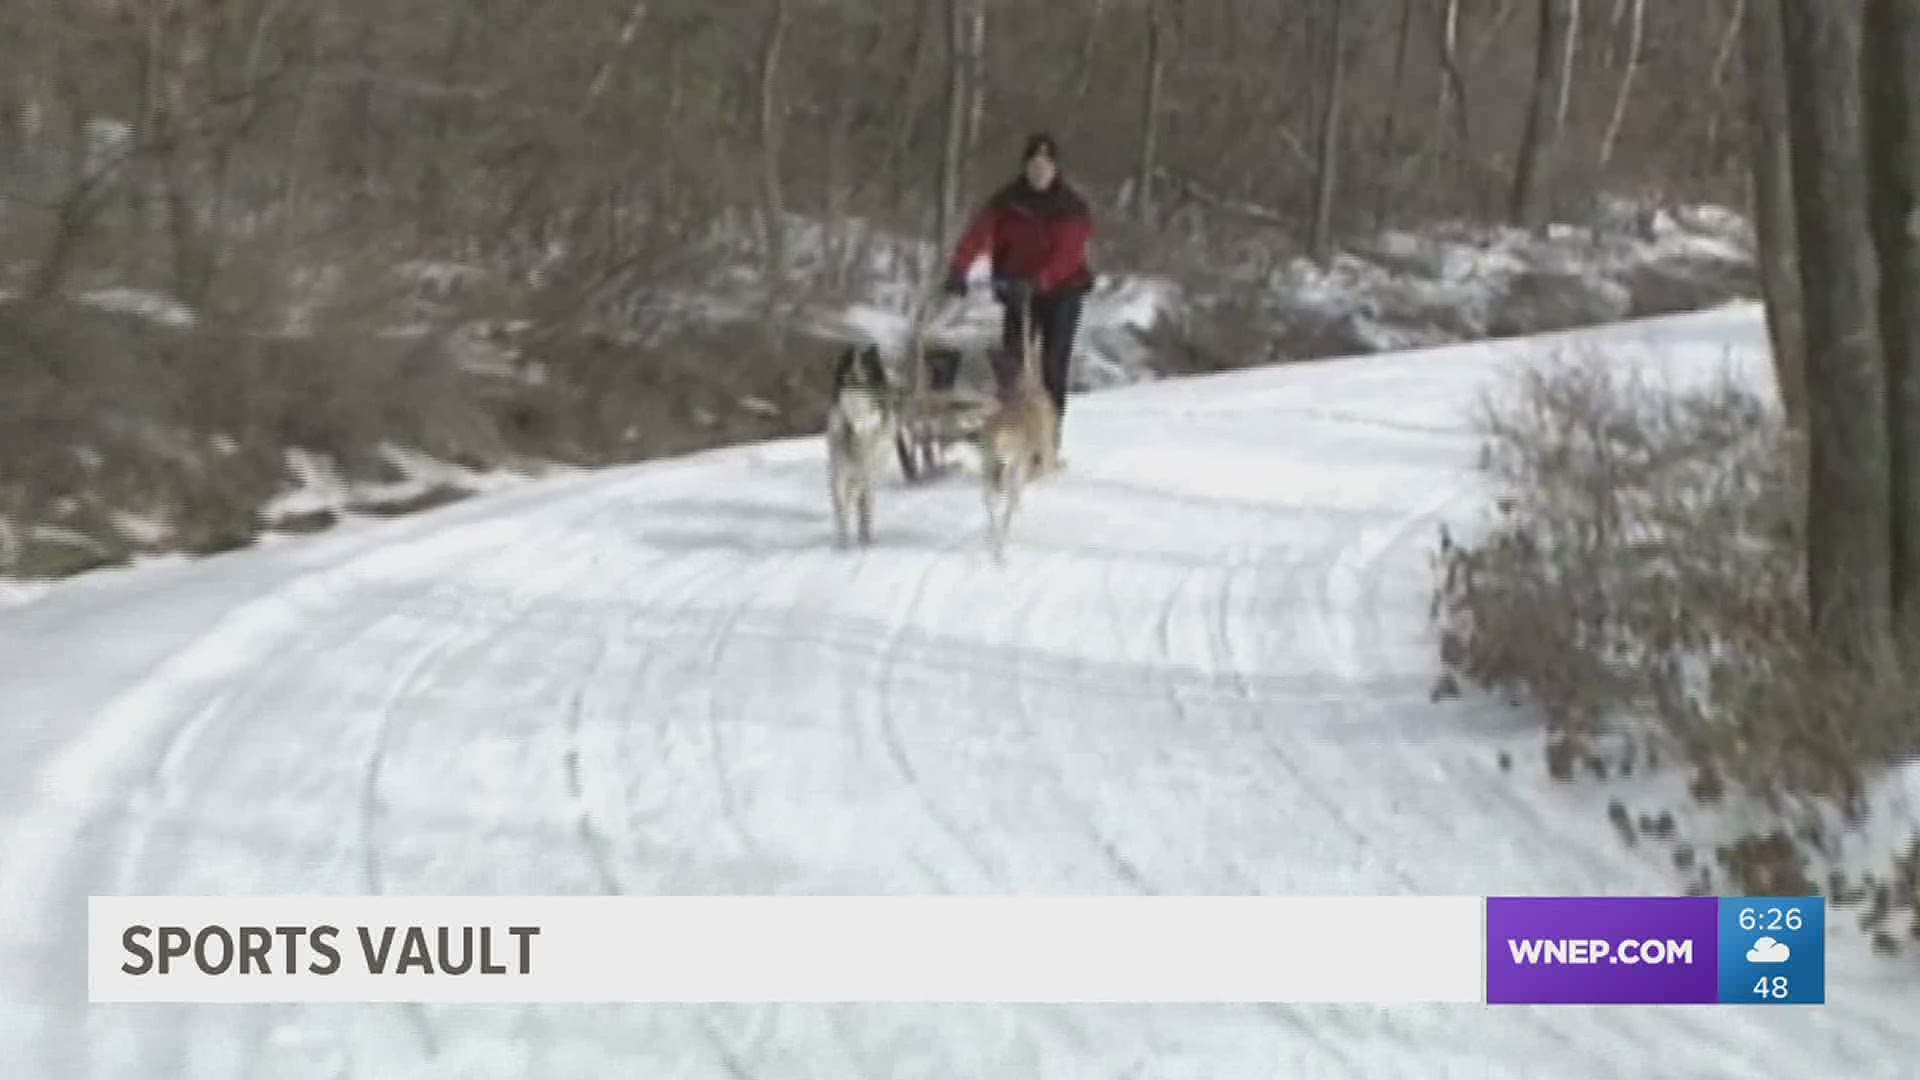 Sports Video Vault: Sled Dog Racing from Thornhurst in 1997.